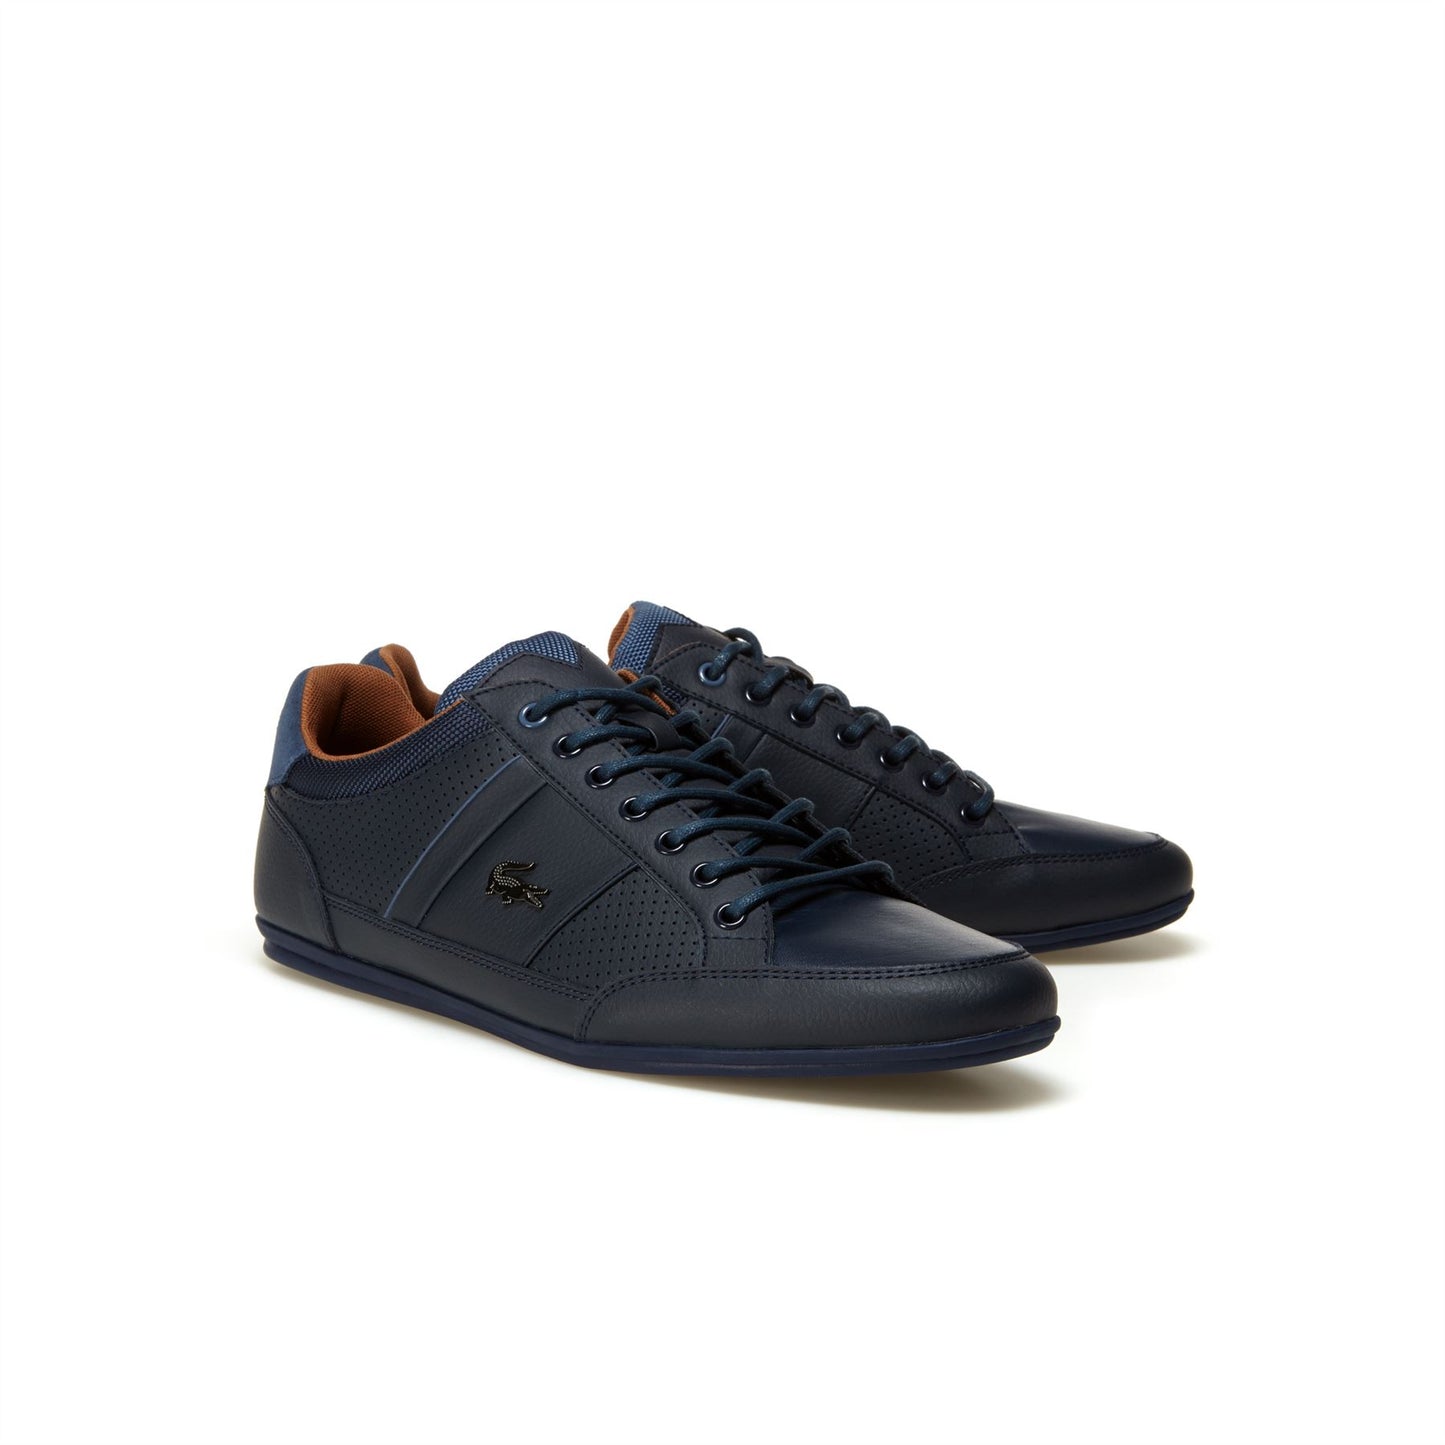 LACOSTE CHAYMON LEATHER TRAINERS NAVY/TAN